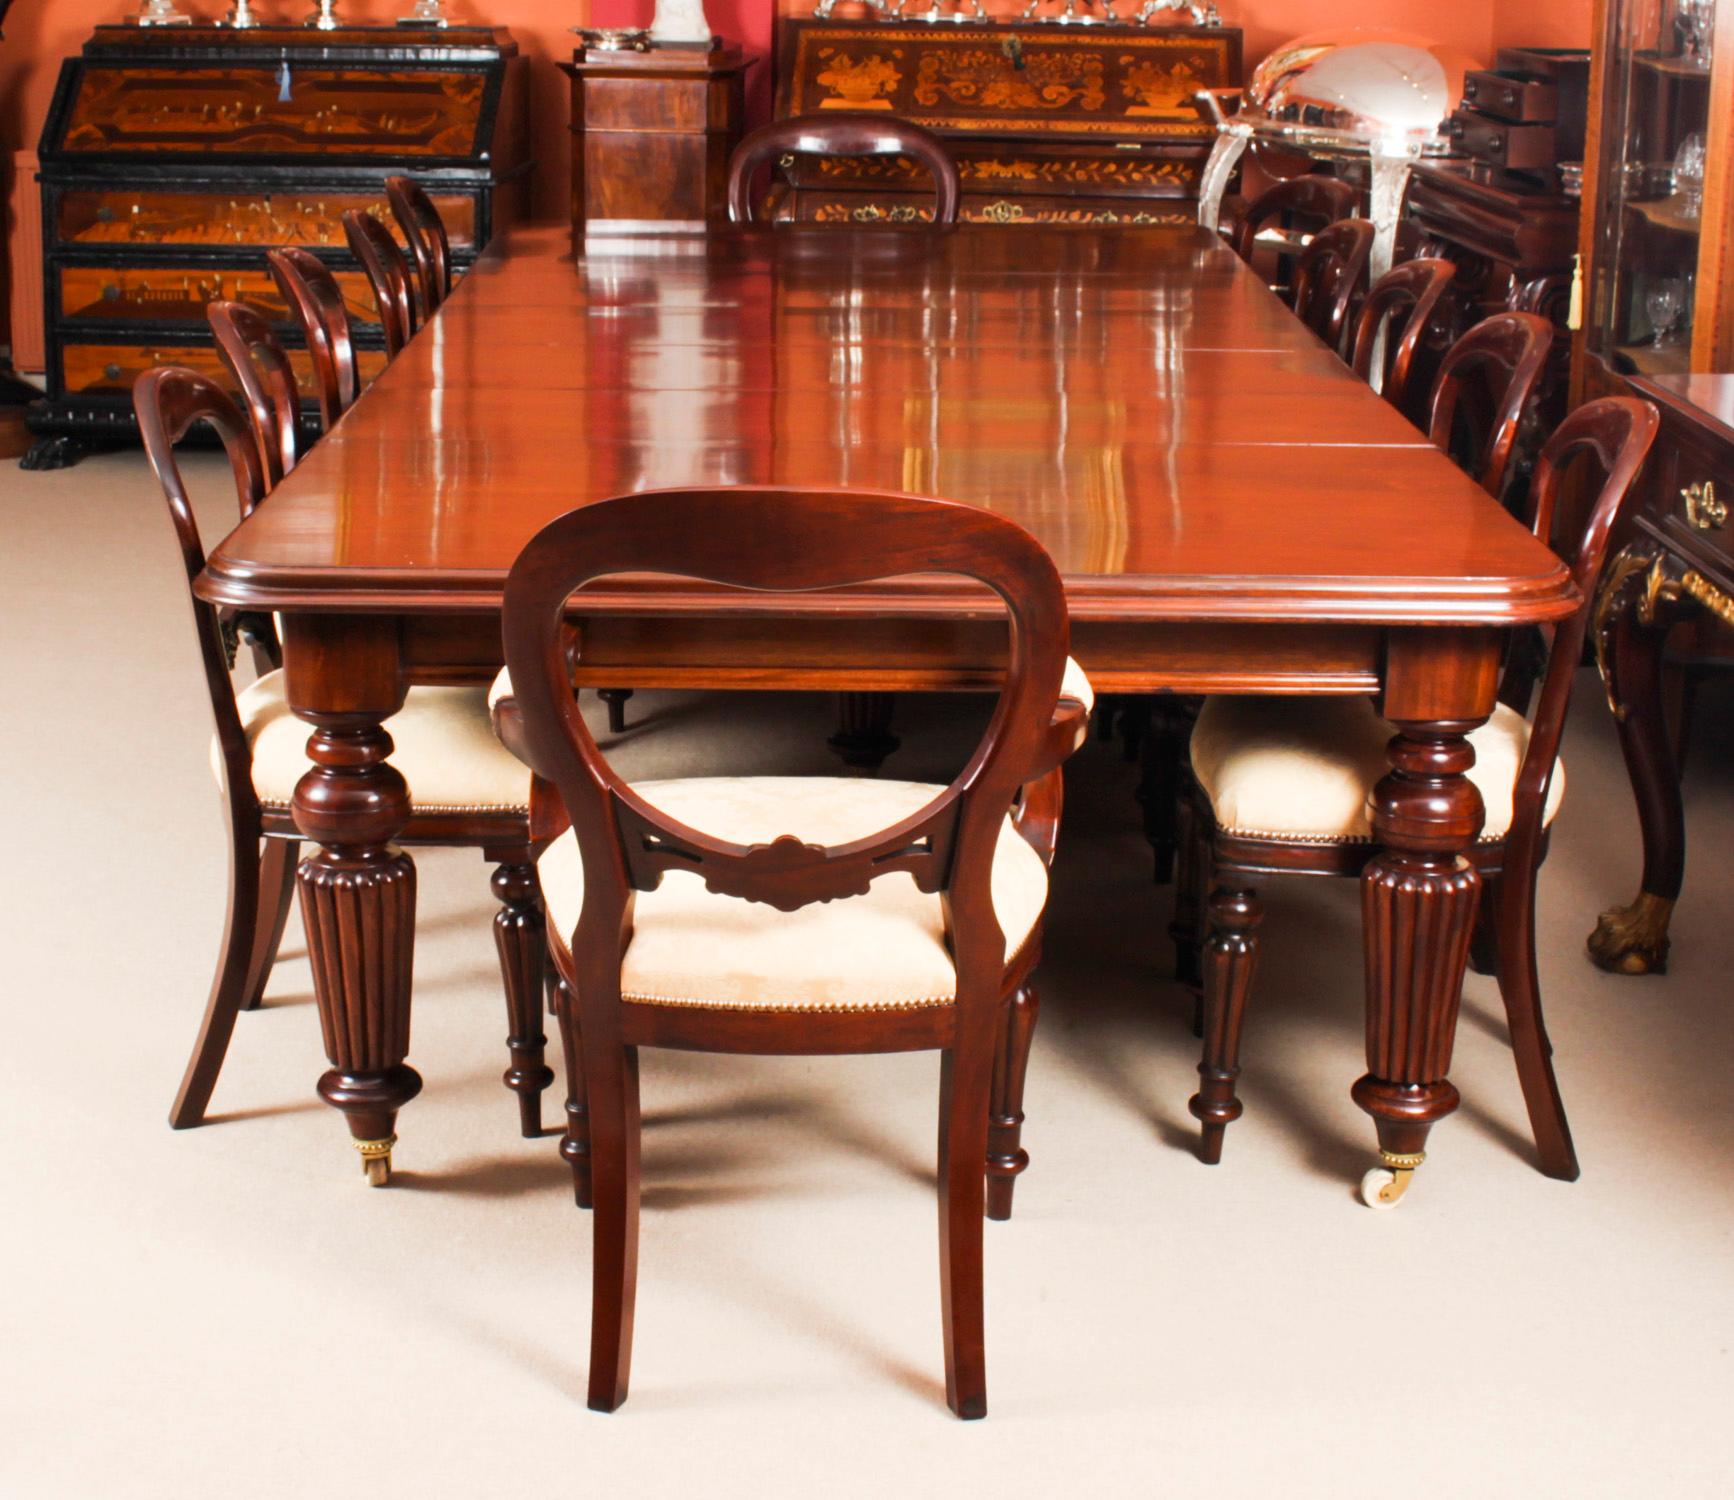 Victorian Antique Mahogany Dining Conference Table 19th Century & 12 Chairs